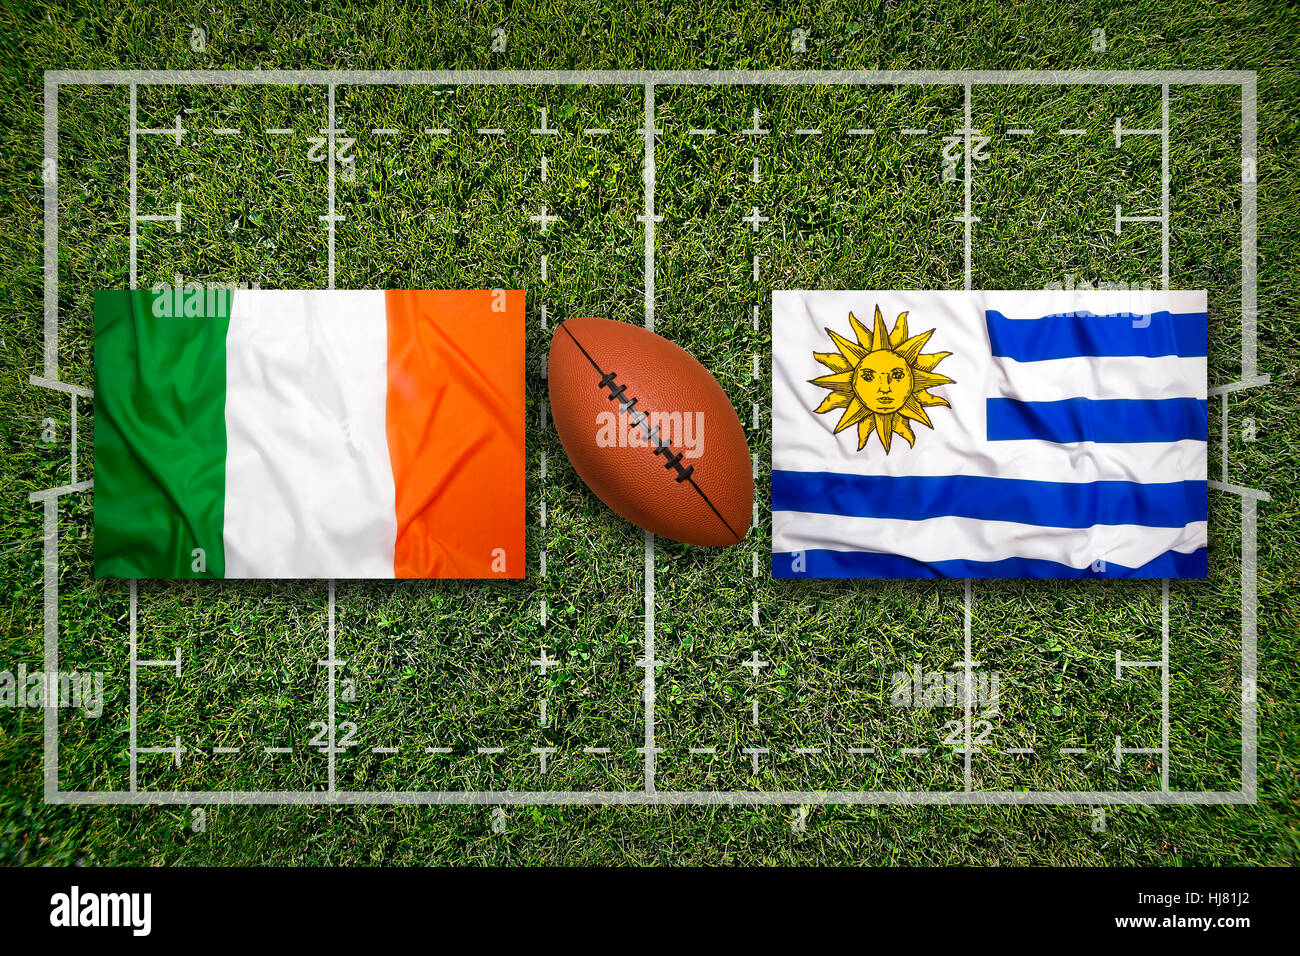 Ireland vs. Uruguay flags on green rugby field Stock Photo